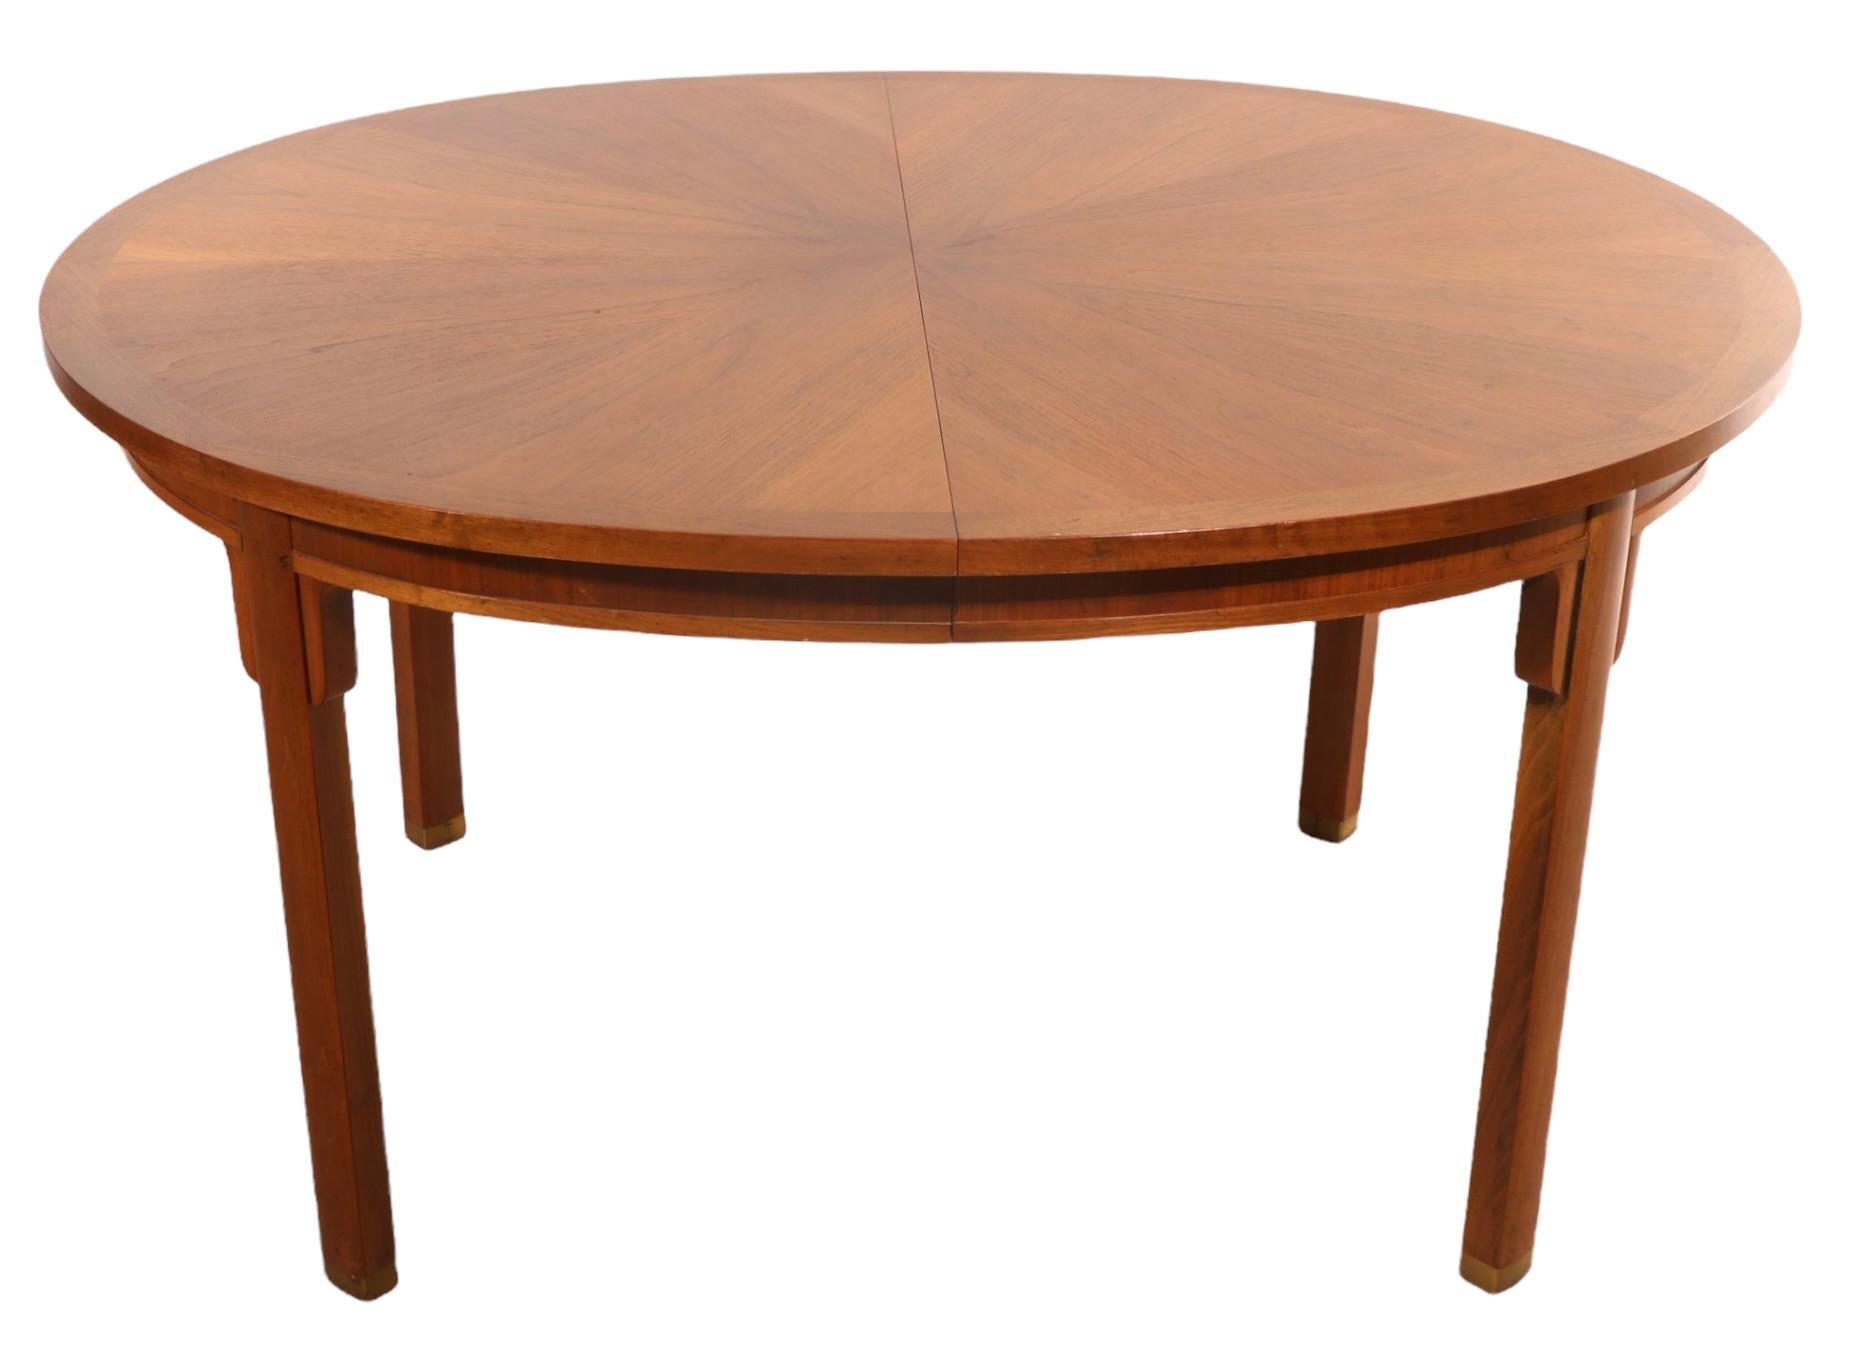 Chinese Export Chinese Asia Modern Style Dining Table by Milling Road Baker Furniture Company 